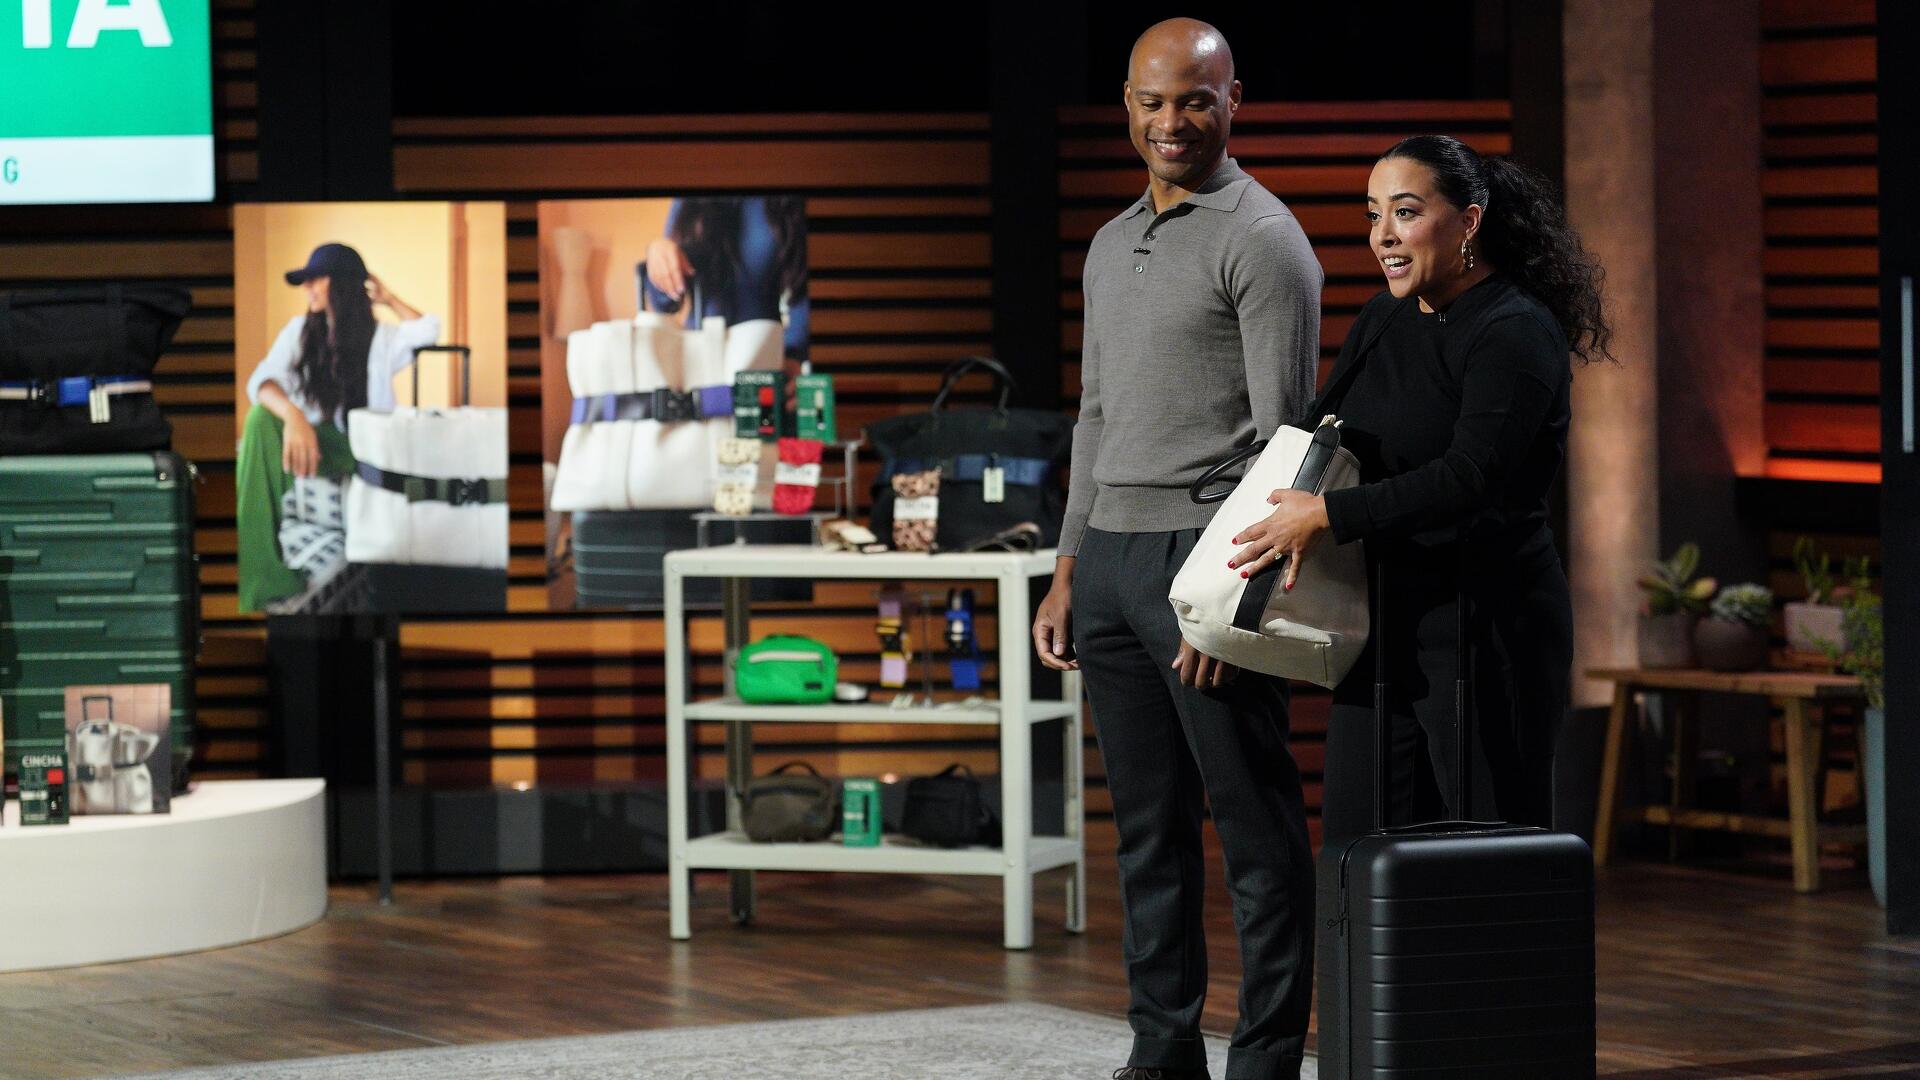 Retold Recycling: Shark Tank Update After the Show - Season 14